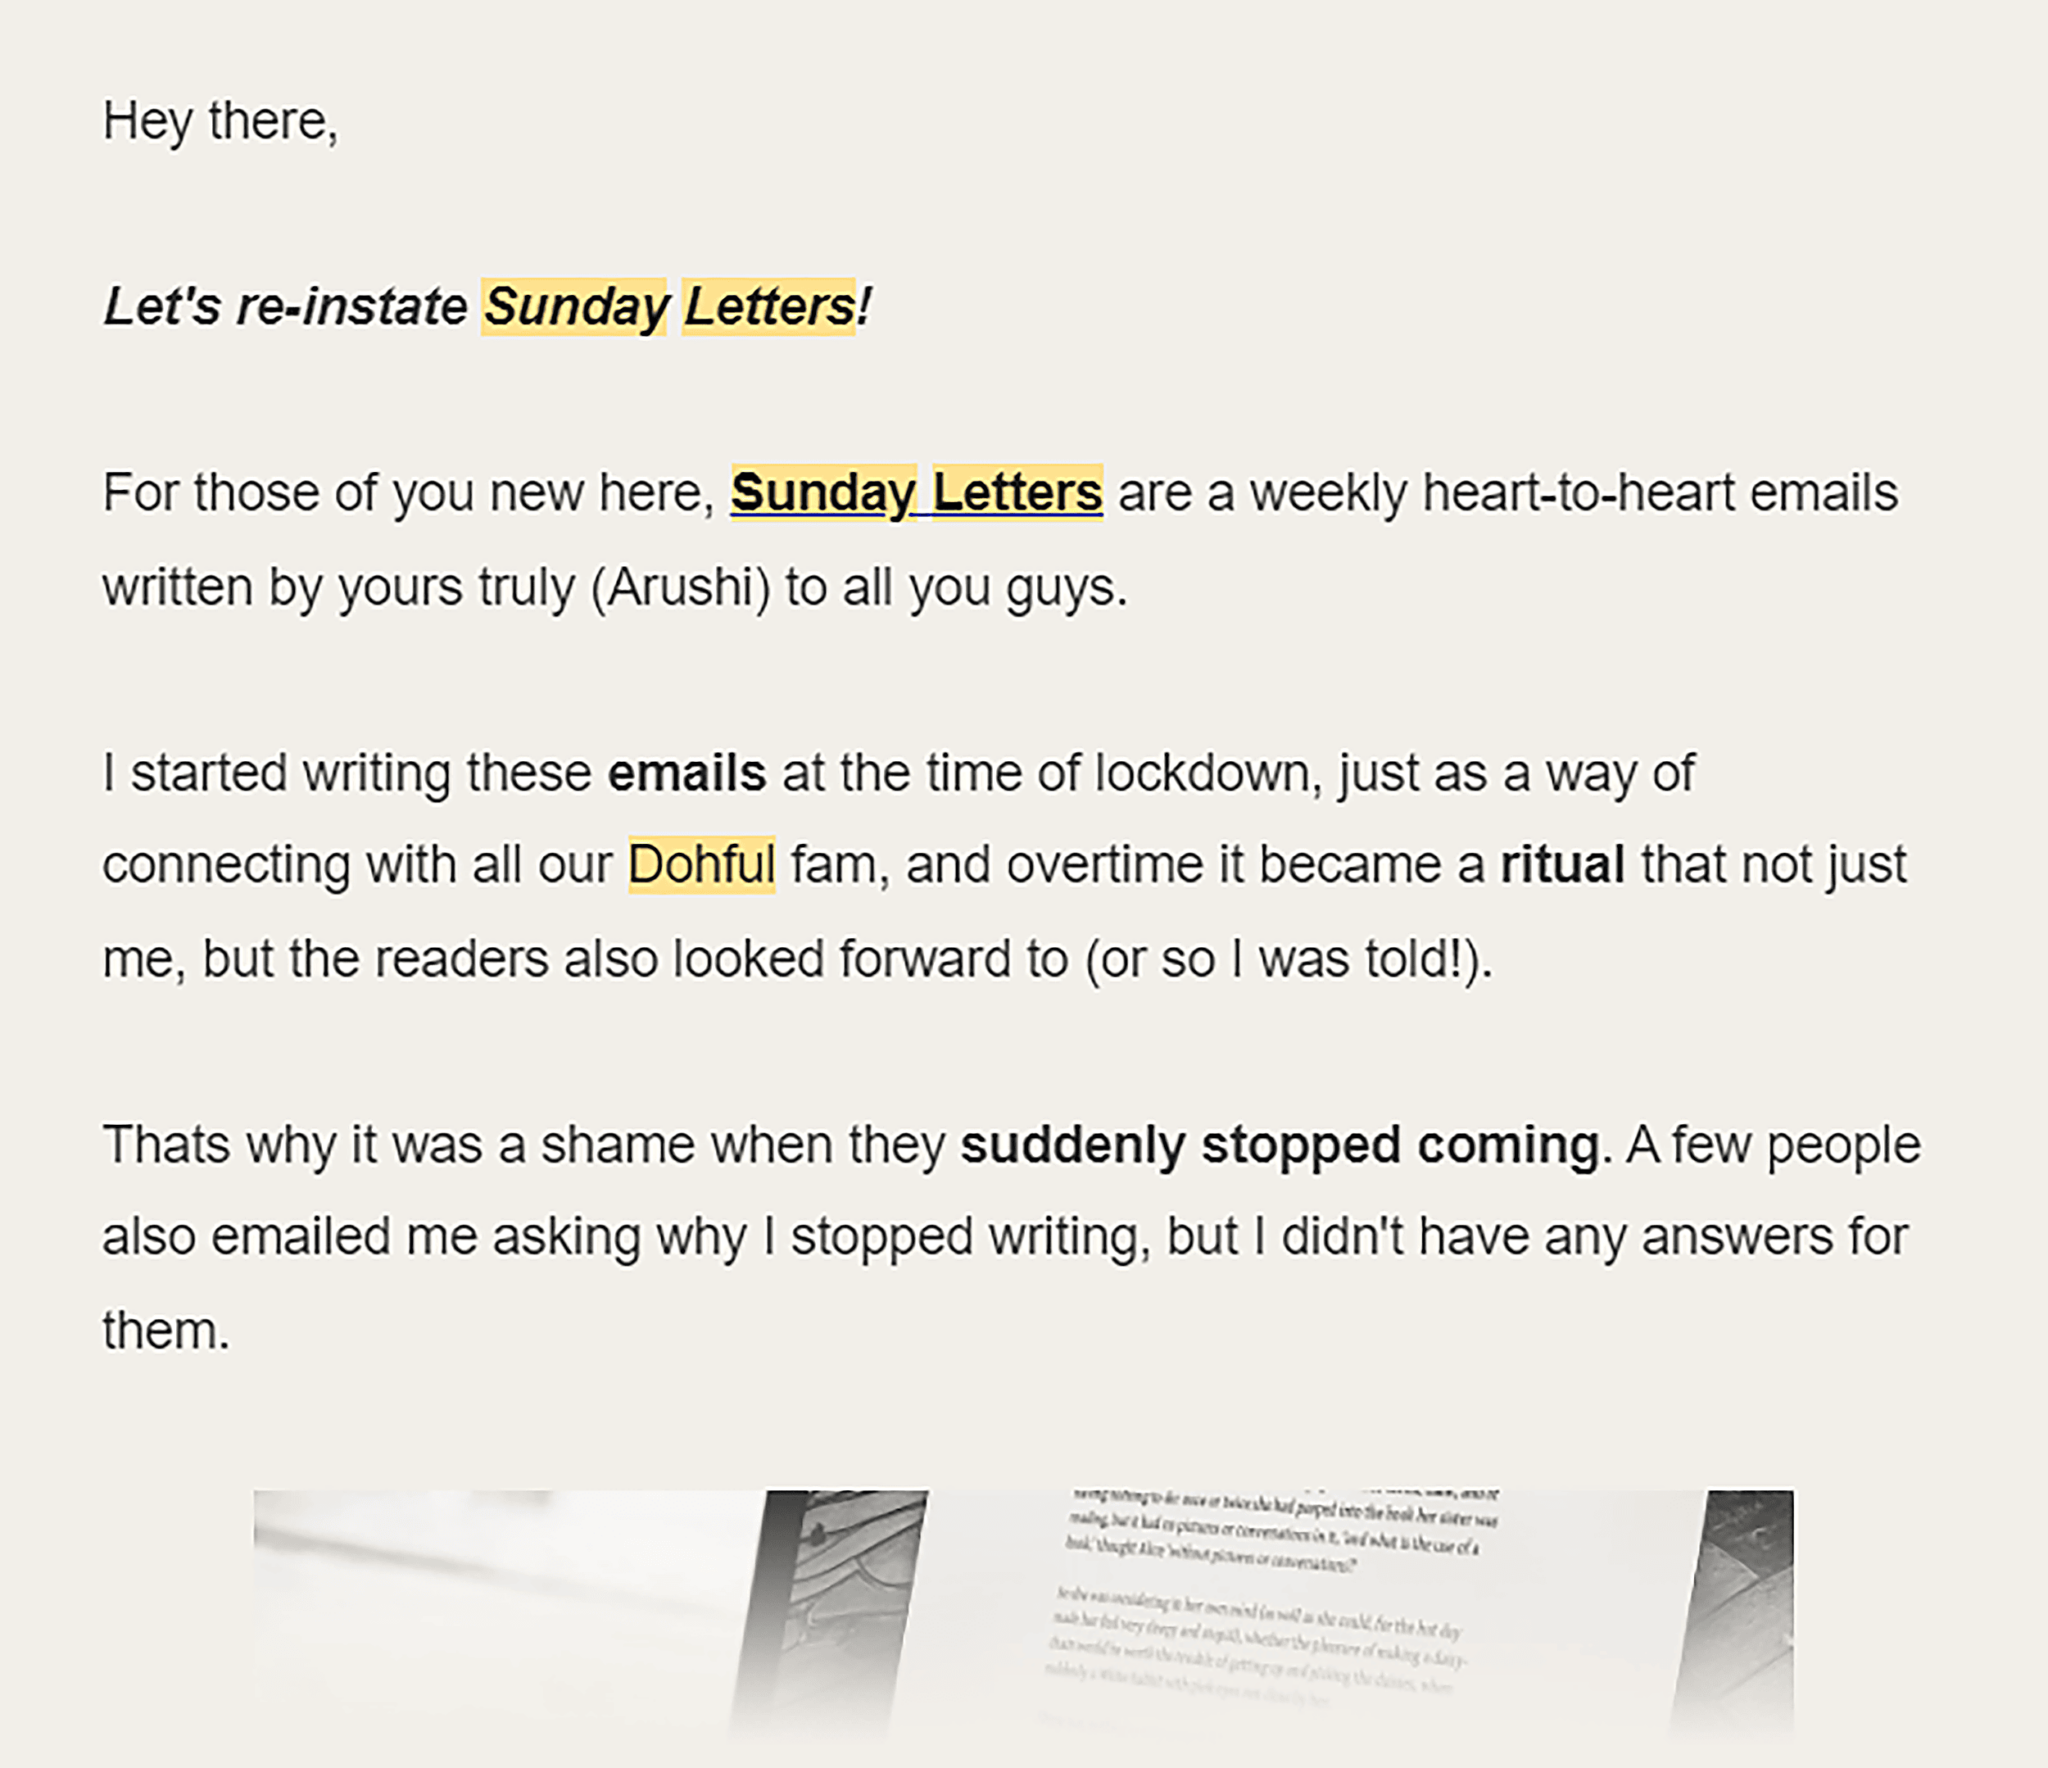 dohful-sunday-newsletter 22 Content Marketing Examples to Inspire You